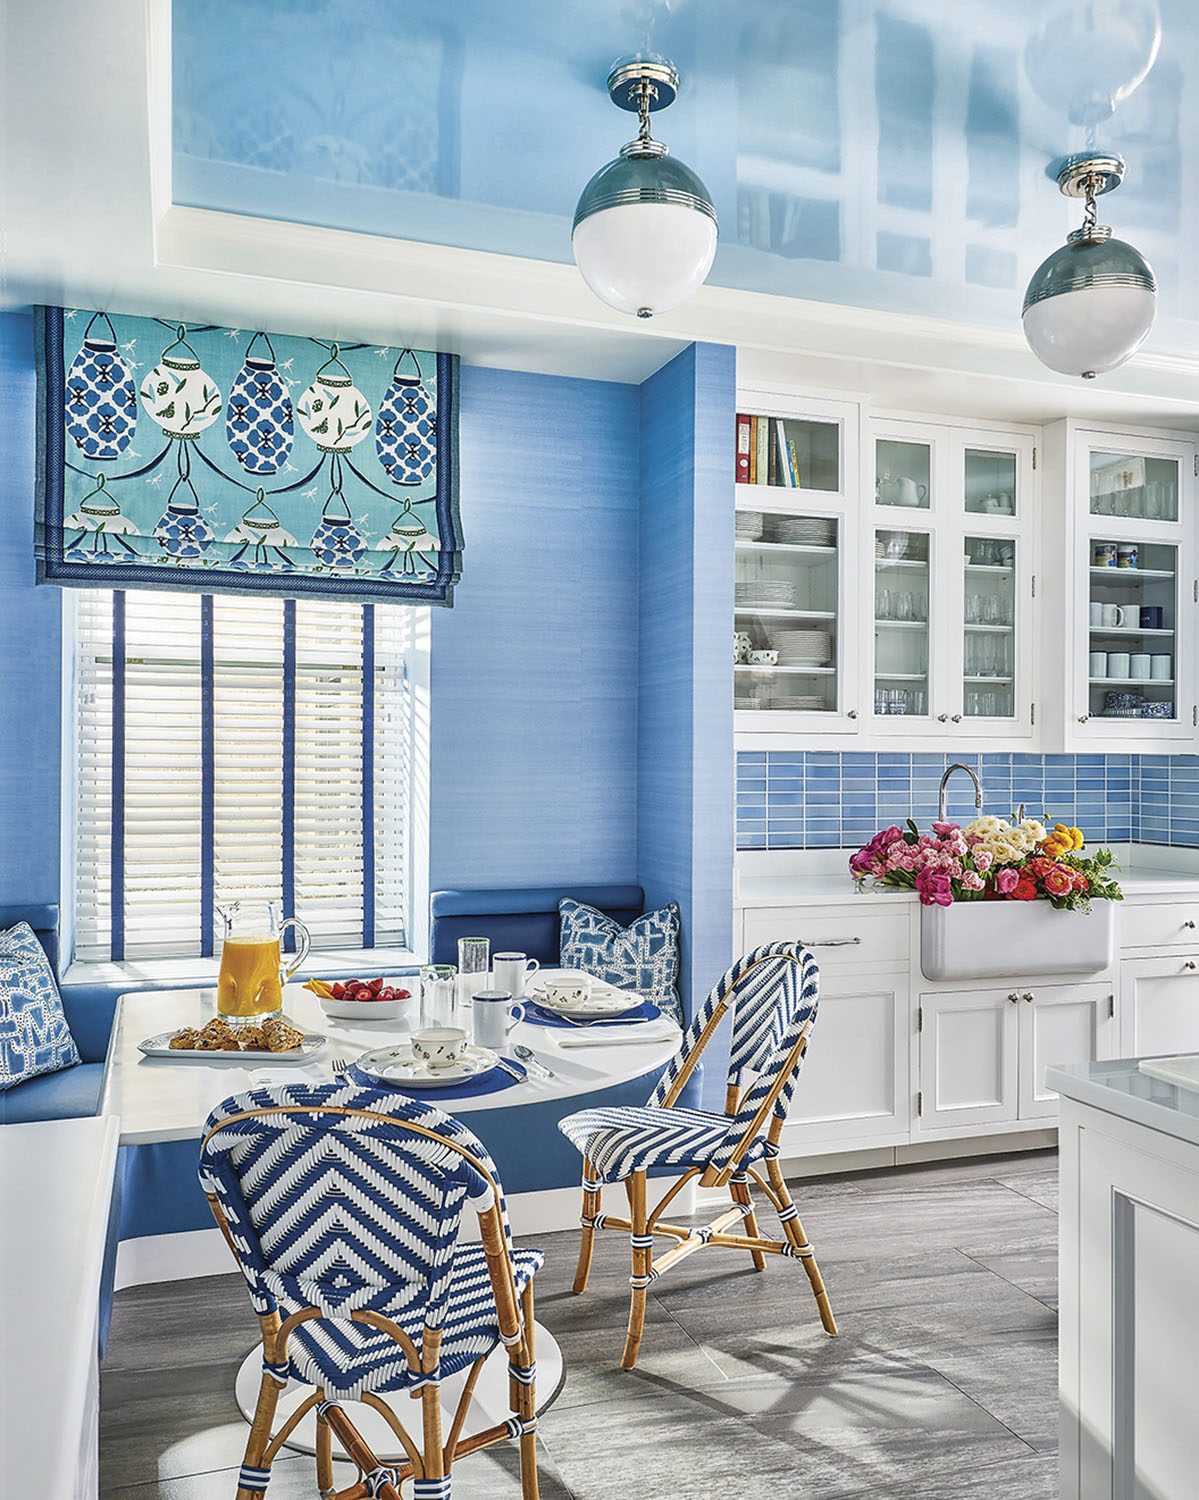 Blue kitchen, sink filled with flowers, interior design by Phillip Thomas